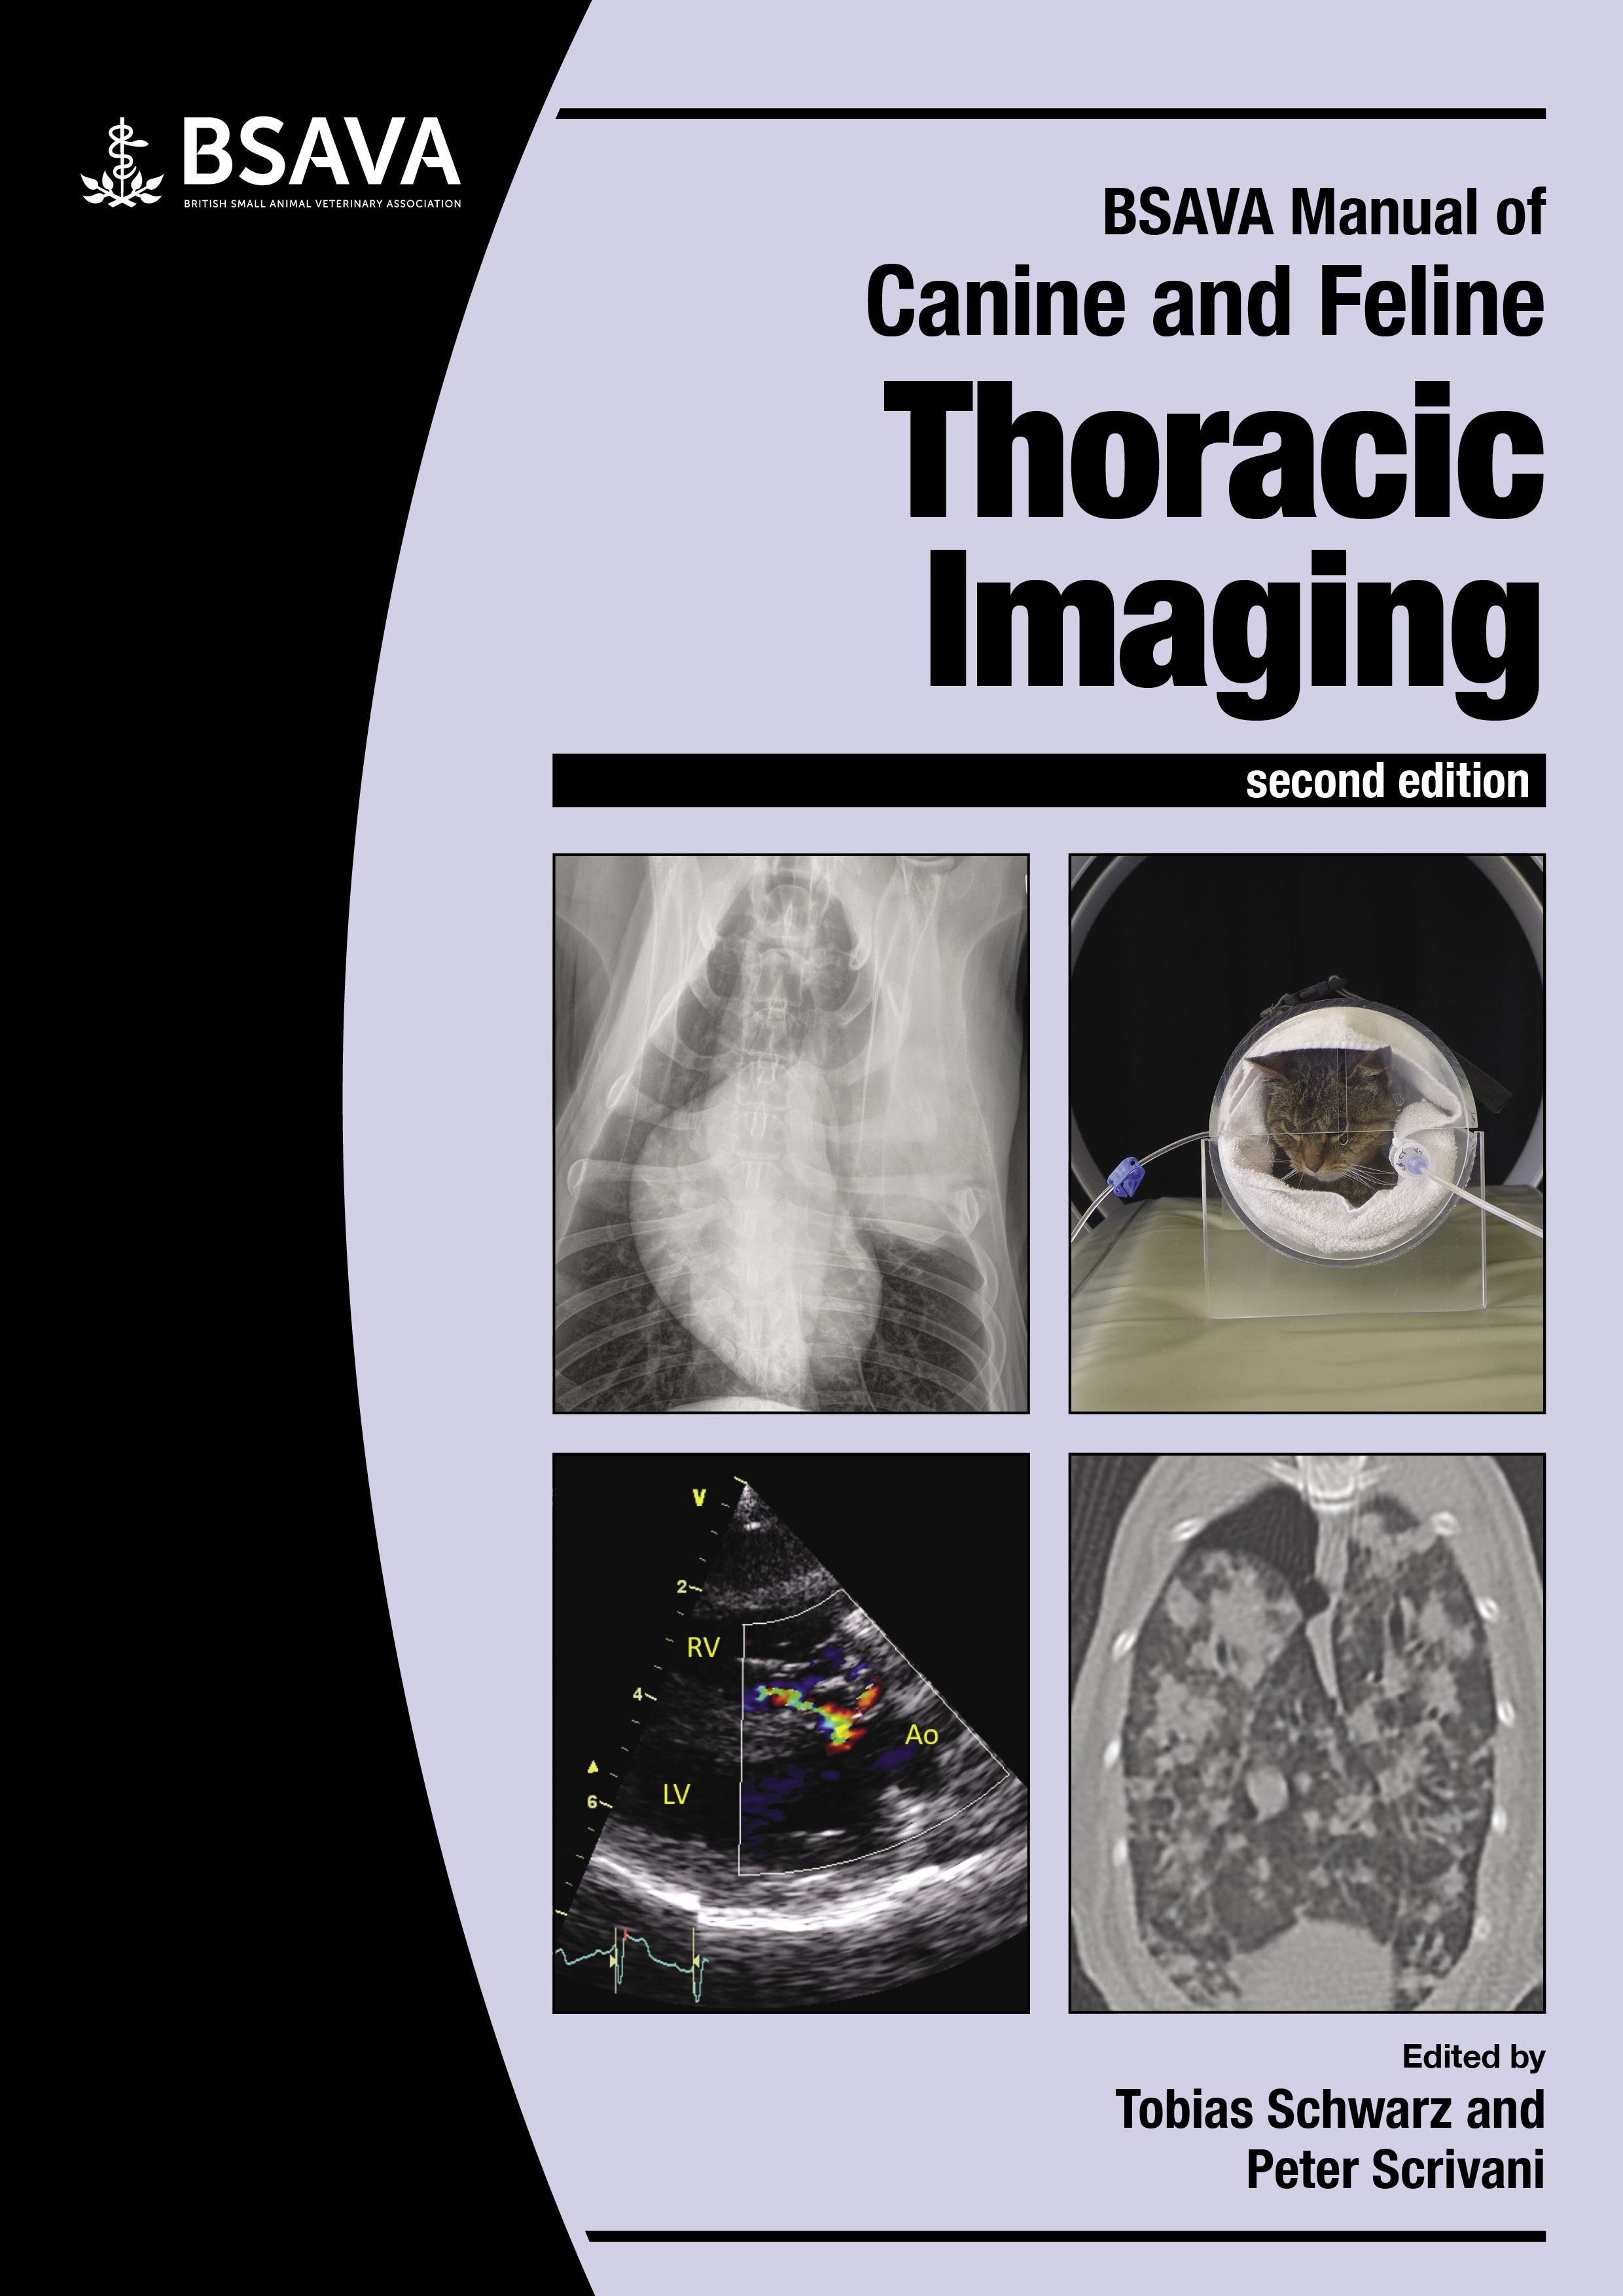 Updated Thoracic Imaging Manual